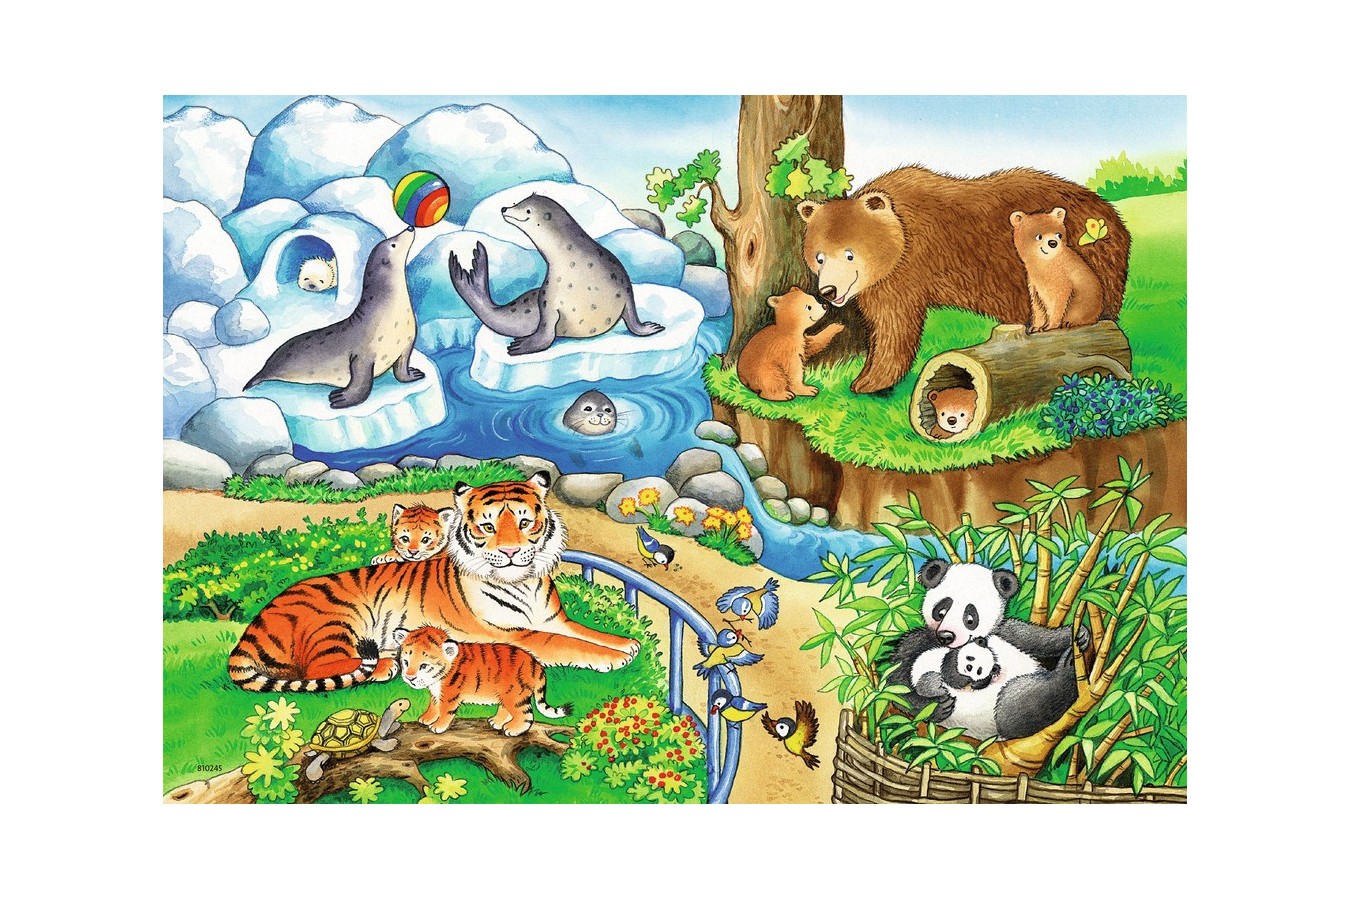 Puzzle Ravensburger - Zoo, 2X12 Piese